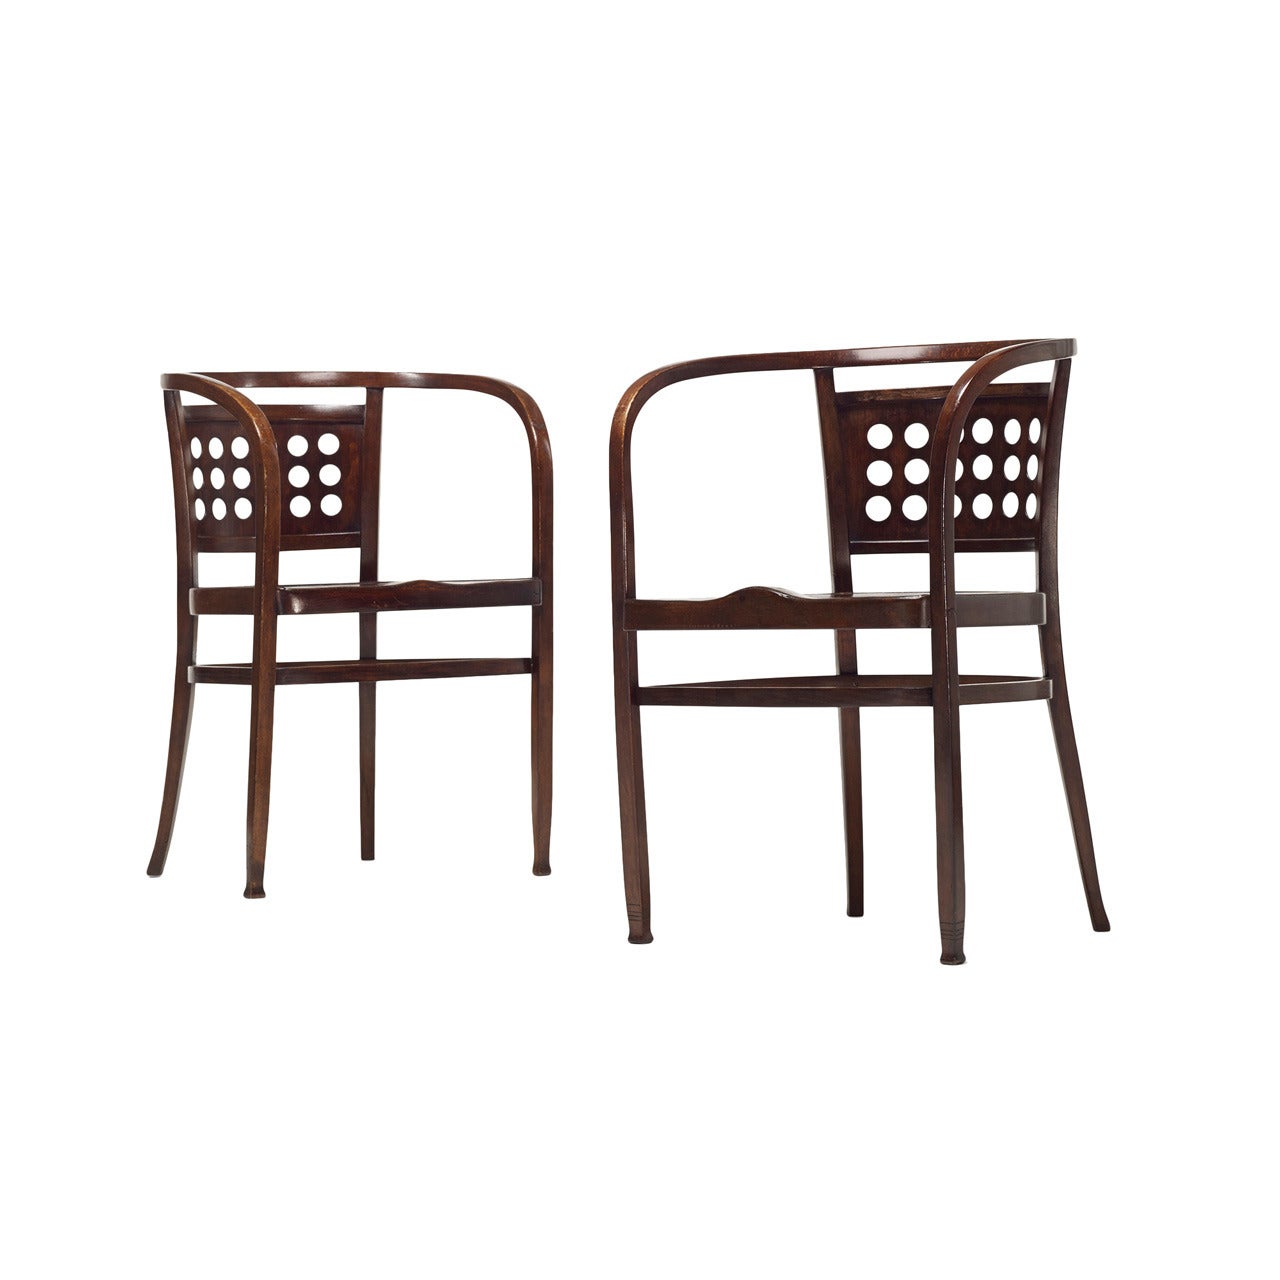 Chairs Model 721, Pair by Otto Wagner for J. & J. Kohn